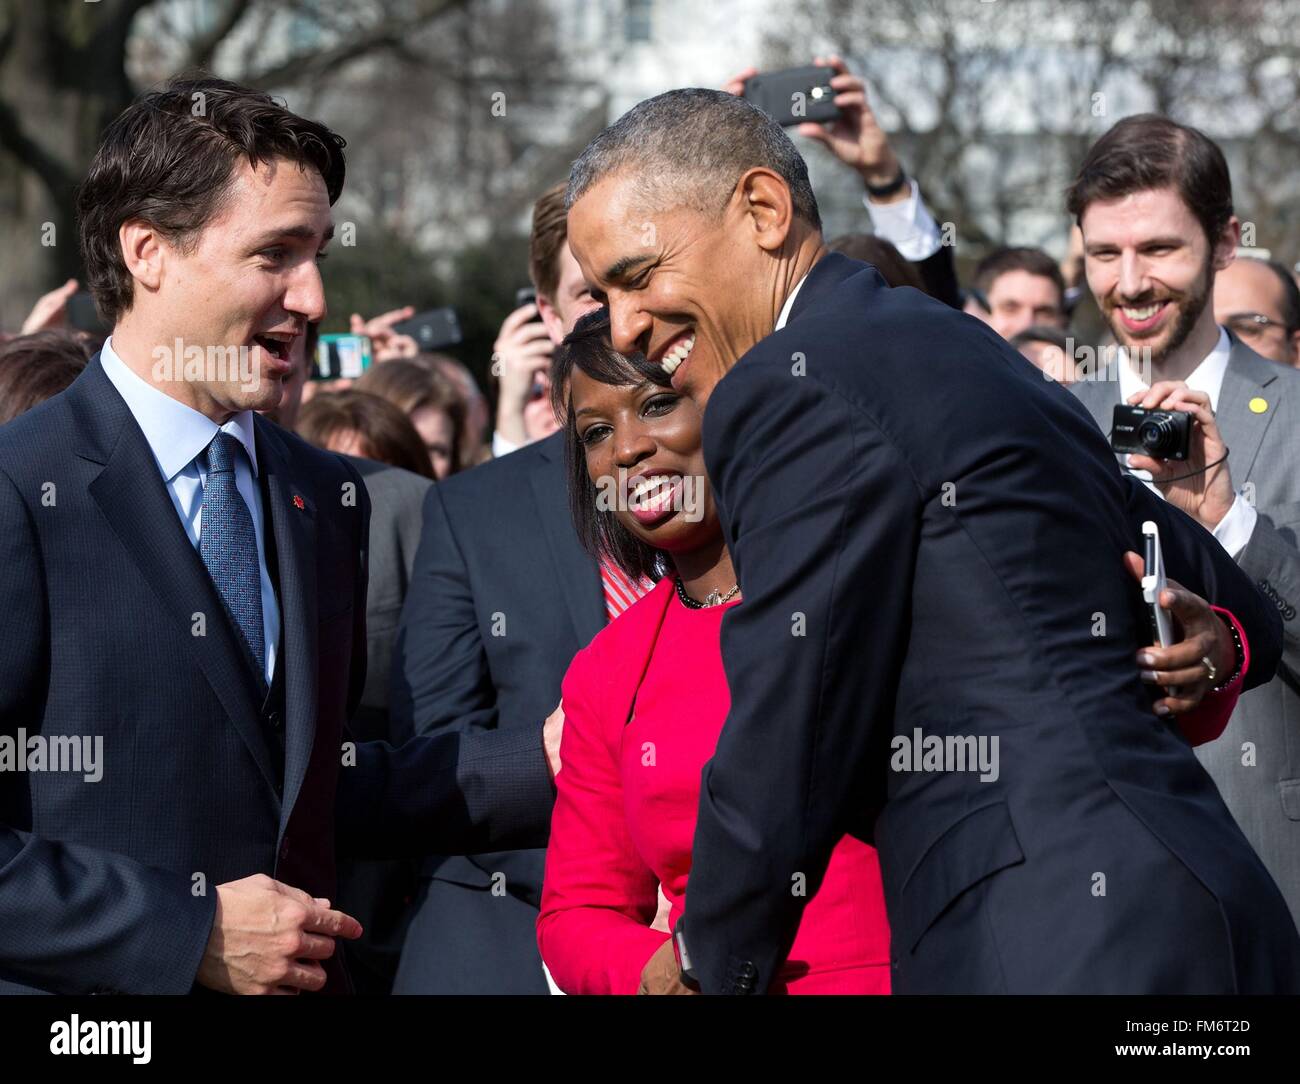 U.S. President Barack Obama hugs a member of the Canadian delegation as Canadian Prime Minister Justin Trudeau looks on during the State Arrival ceremony on the South Lawn of the White House March 10, 2016 in Washington, DC. This is the first state visit by a Canadian Prime Minister in 20-years. Stock Photo